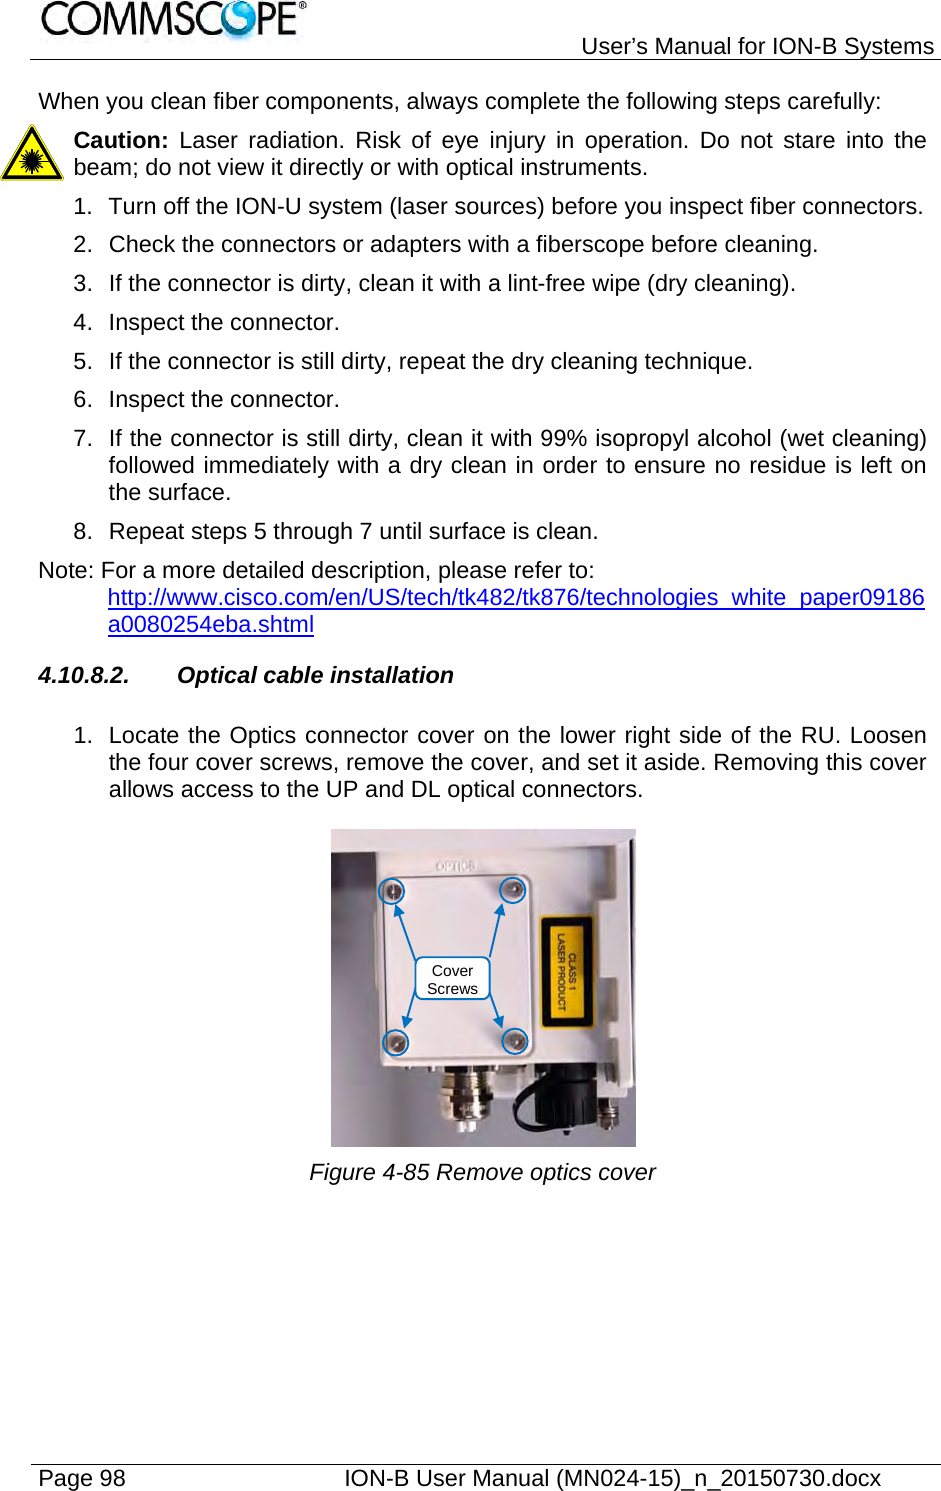   User’s Manual for ION-B Systems Page 98    ION-B User Manual (MN024-15)_n_20150730.docx  When you clean fiber components, always complete the following steps carefully: Caution: Laser radiation. Risk of eye injury in operation. Do not stare into the beam; do not view it directly or with optical instruments. 1.  Turn off the ION-U system (laser sources) before you inspect fiber connectors. 2.  Check the connectors or adapters with a fiberscope before cleaning. 3.  If the connector is dirty, clean it with a lint-free wipe (dry cleaning). 4.  Inspect the connector. 5.  If the connector is still dirty, repeat the dry cleaning technique. 6.  Inspect the connector. 7.  If the connector is still dirty, clean it with 99% isopropyl alcohol (wet cleaning) followed immediately with a dry clean in order to ensure no residue is left on the surface. 8.  Repeat steps 5 through 7 until surface is clean. Note: For a more detailed description, please refer to:  http://www.cisco.com/en/US/tech/tk482/tk876/technologies_white_paper09186a0080254eba.shtml 4.10.8.2. Optical cable installation  1.  Locate the Optics connector cover on the lower right side of the RU. Loosen the four cover screws, remove the cover, and set it aside. Removing this cover allows access to the UP and DL optical connectors.   Figure 4-85 Remove optics cover Cover Screws